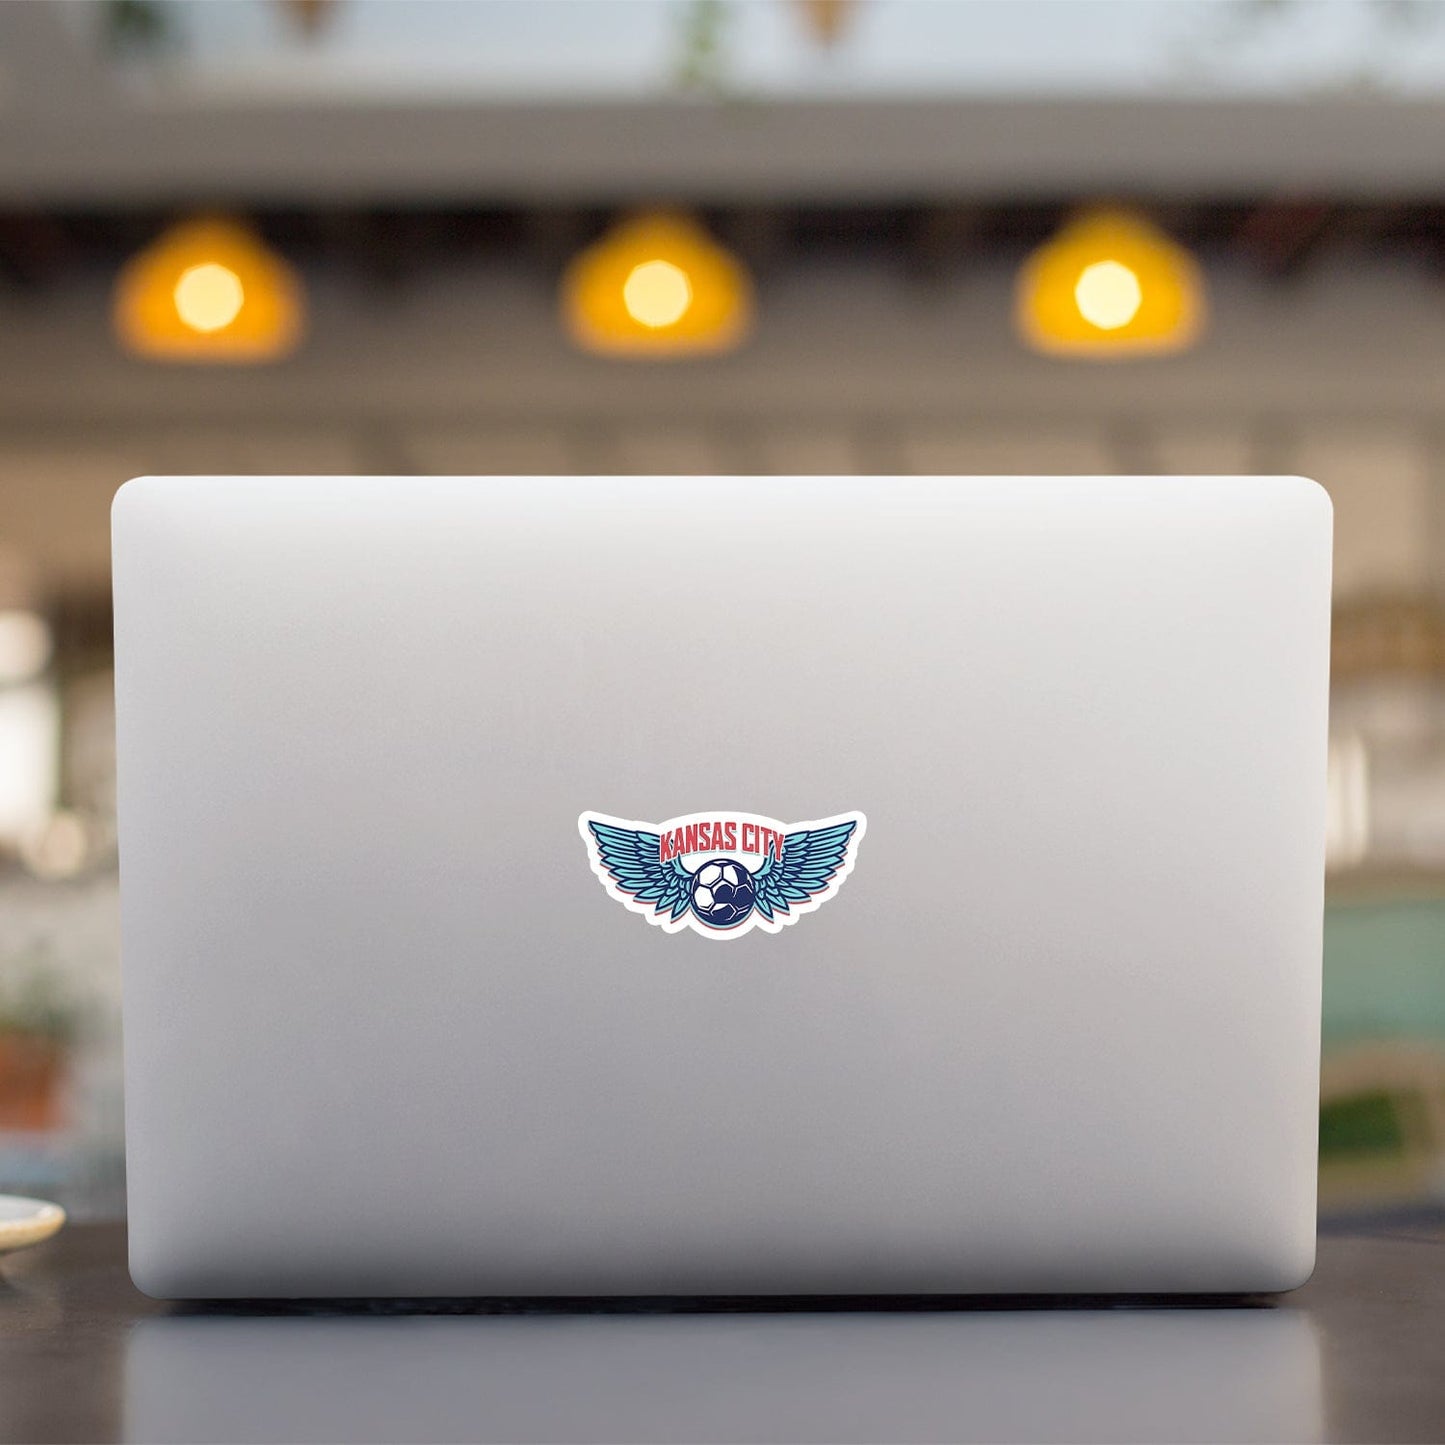 KC Swag Kansas City Current KC WING BALL die-cut sticker decal made from waterproof vinyl on open laptop back